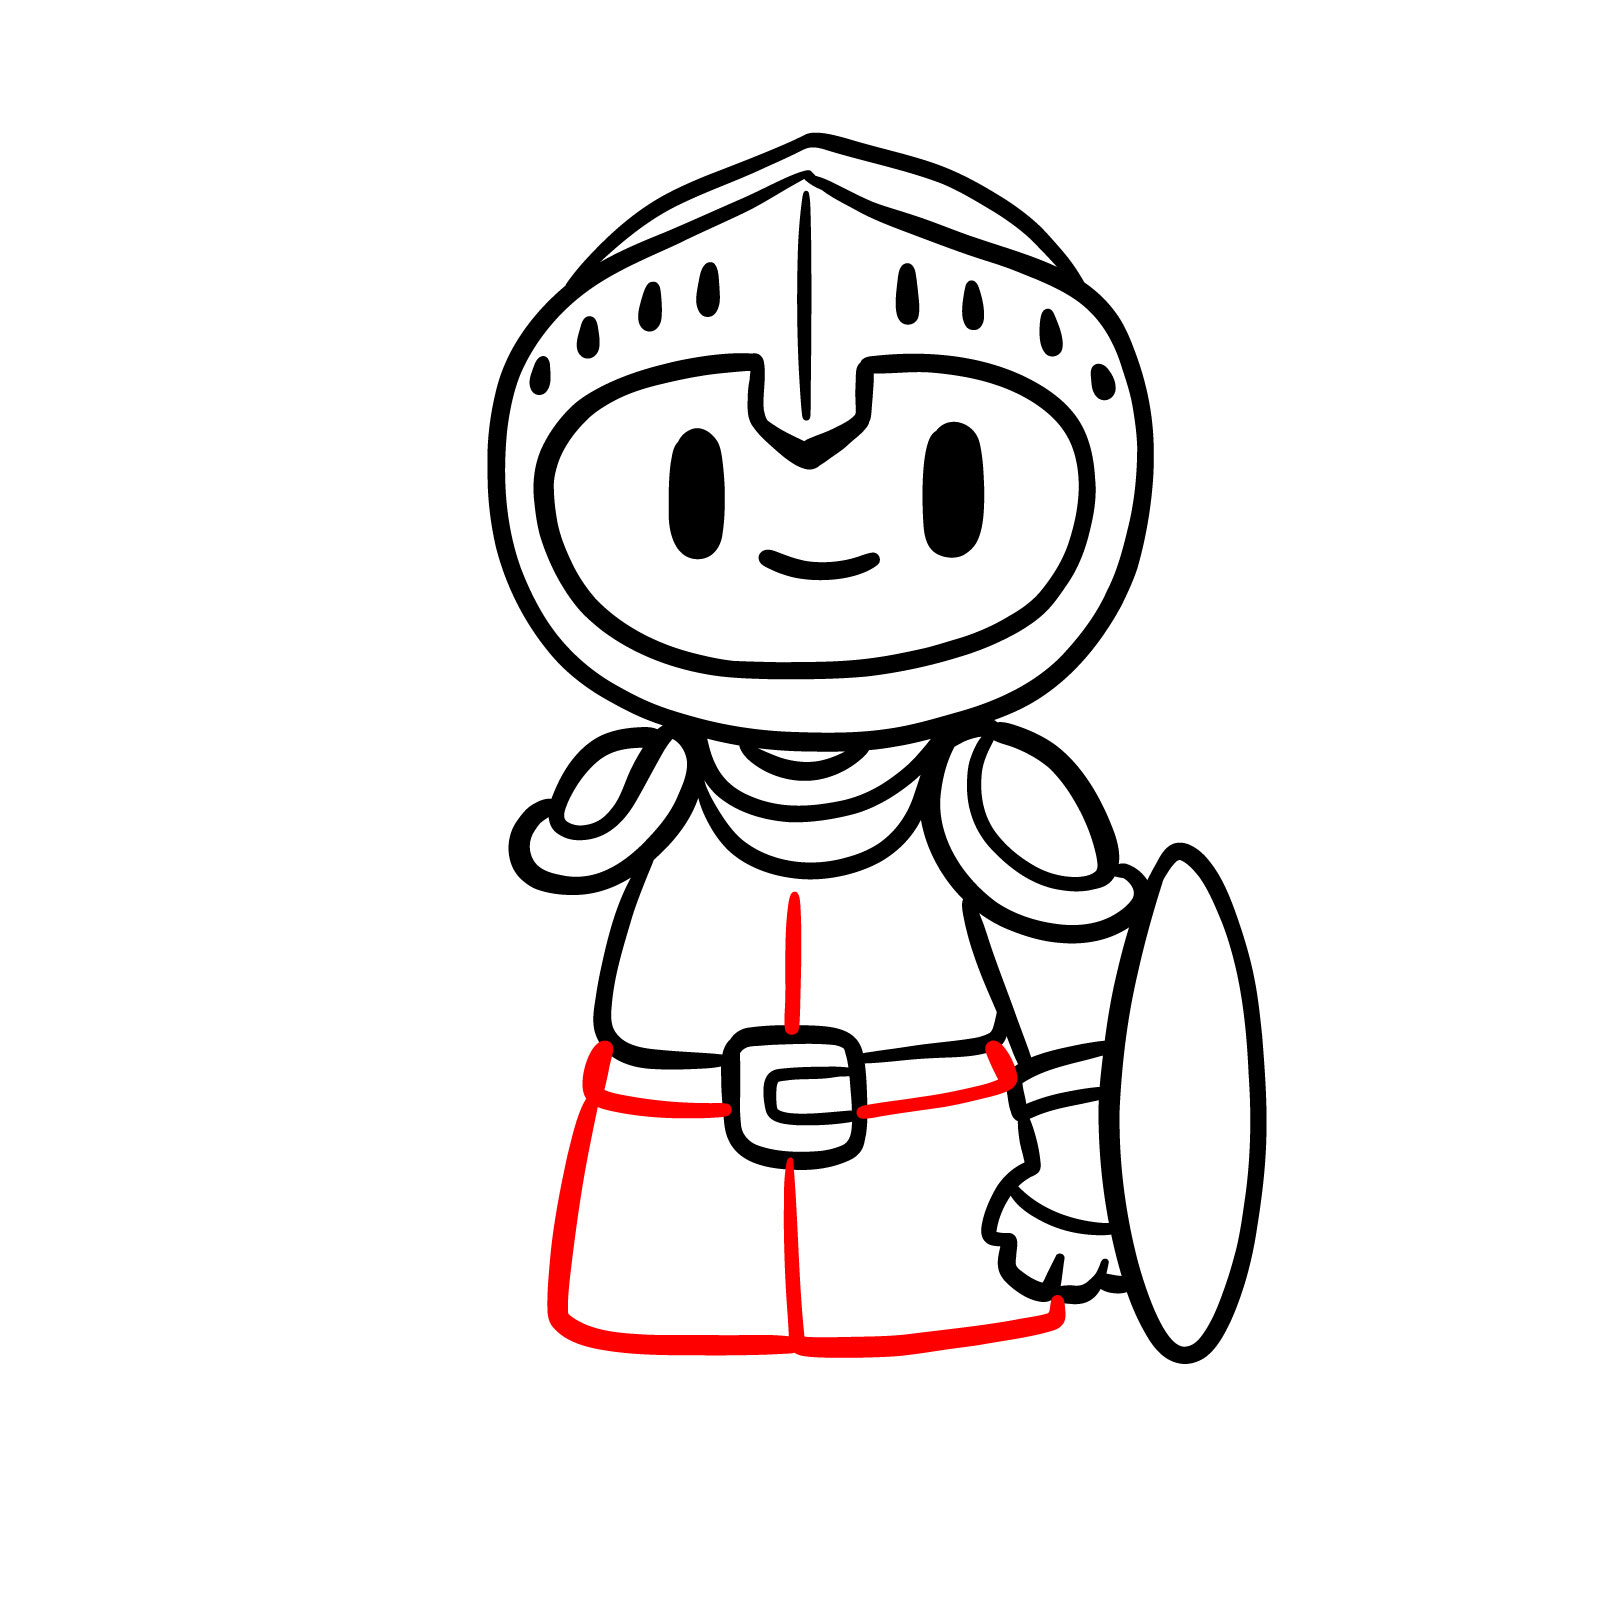 Easy paladin drawing step 8: belt and tunic